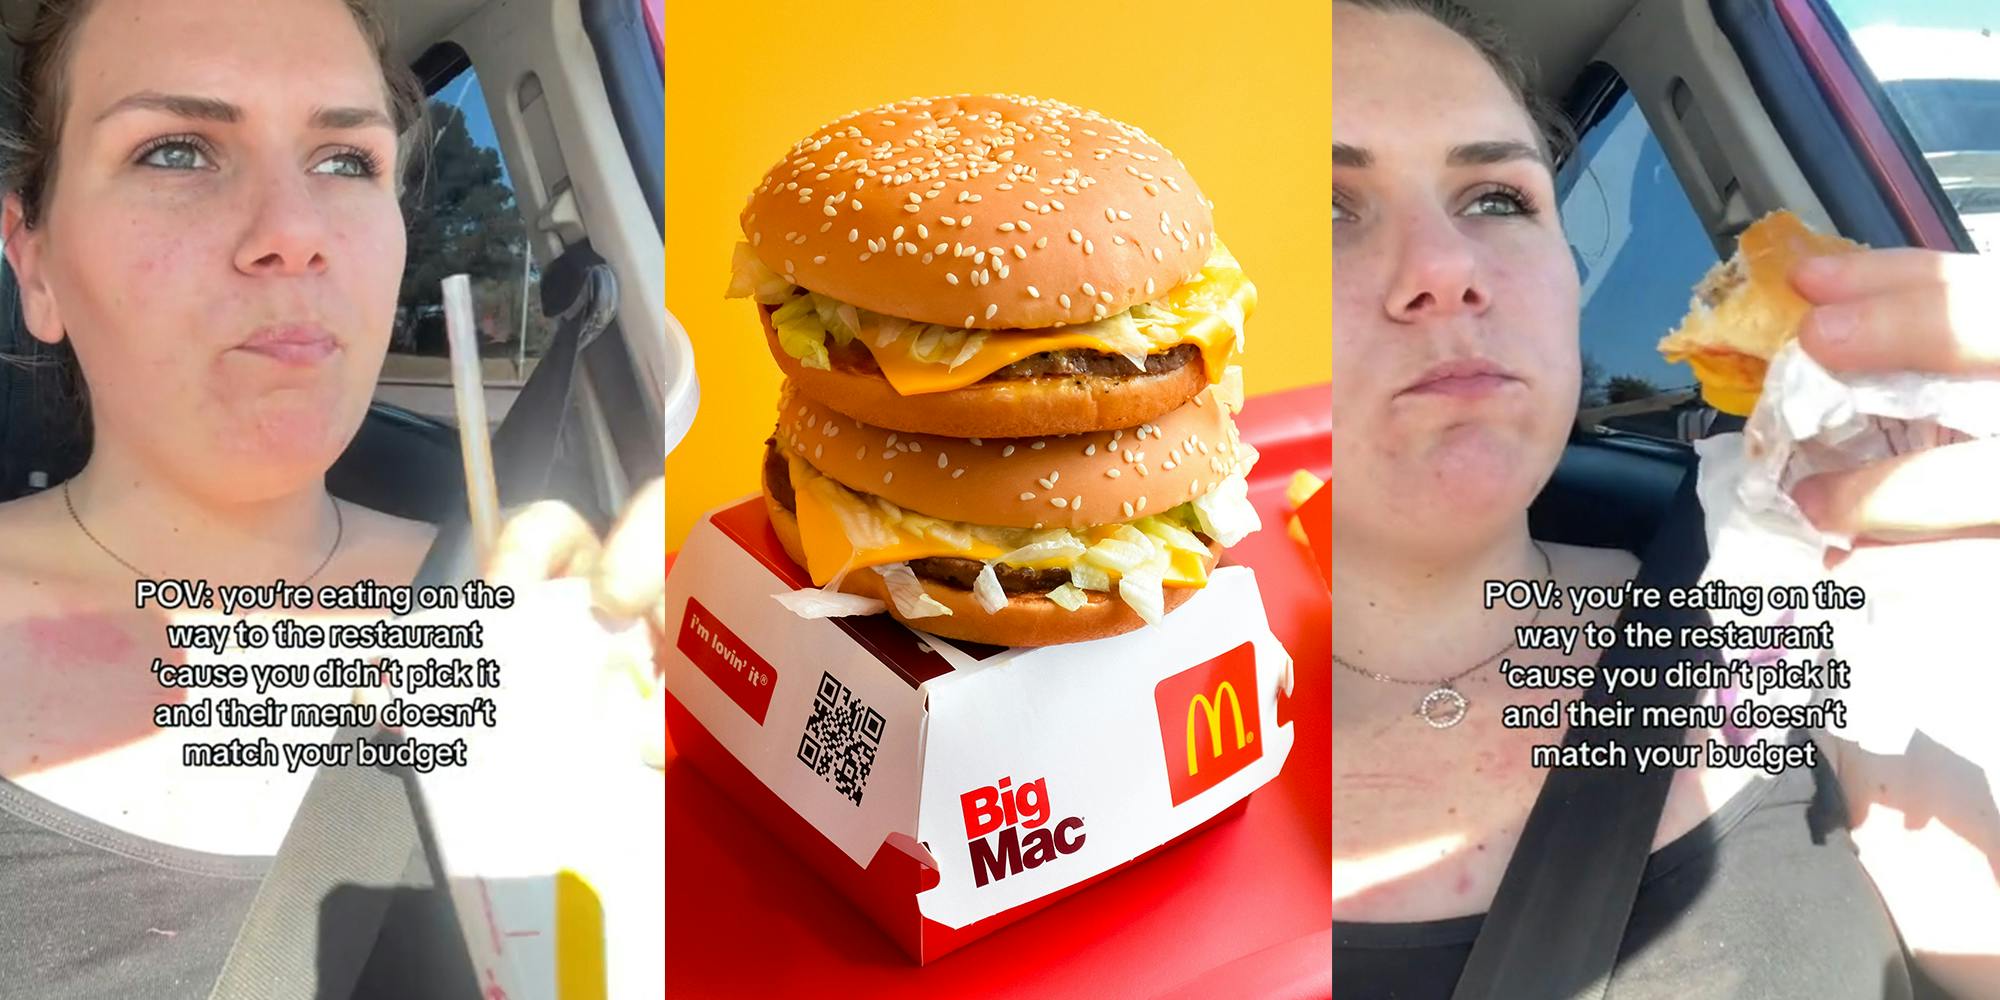 Woman eats McDonald's on the way to dinner because restaurant doesn't 'fit her budget.